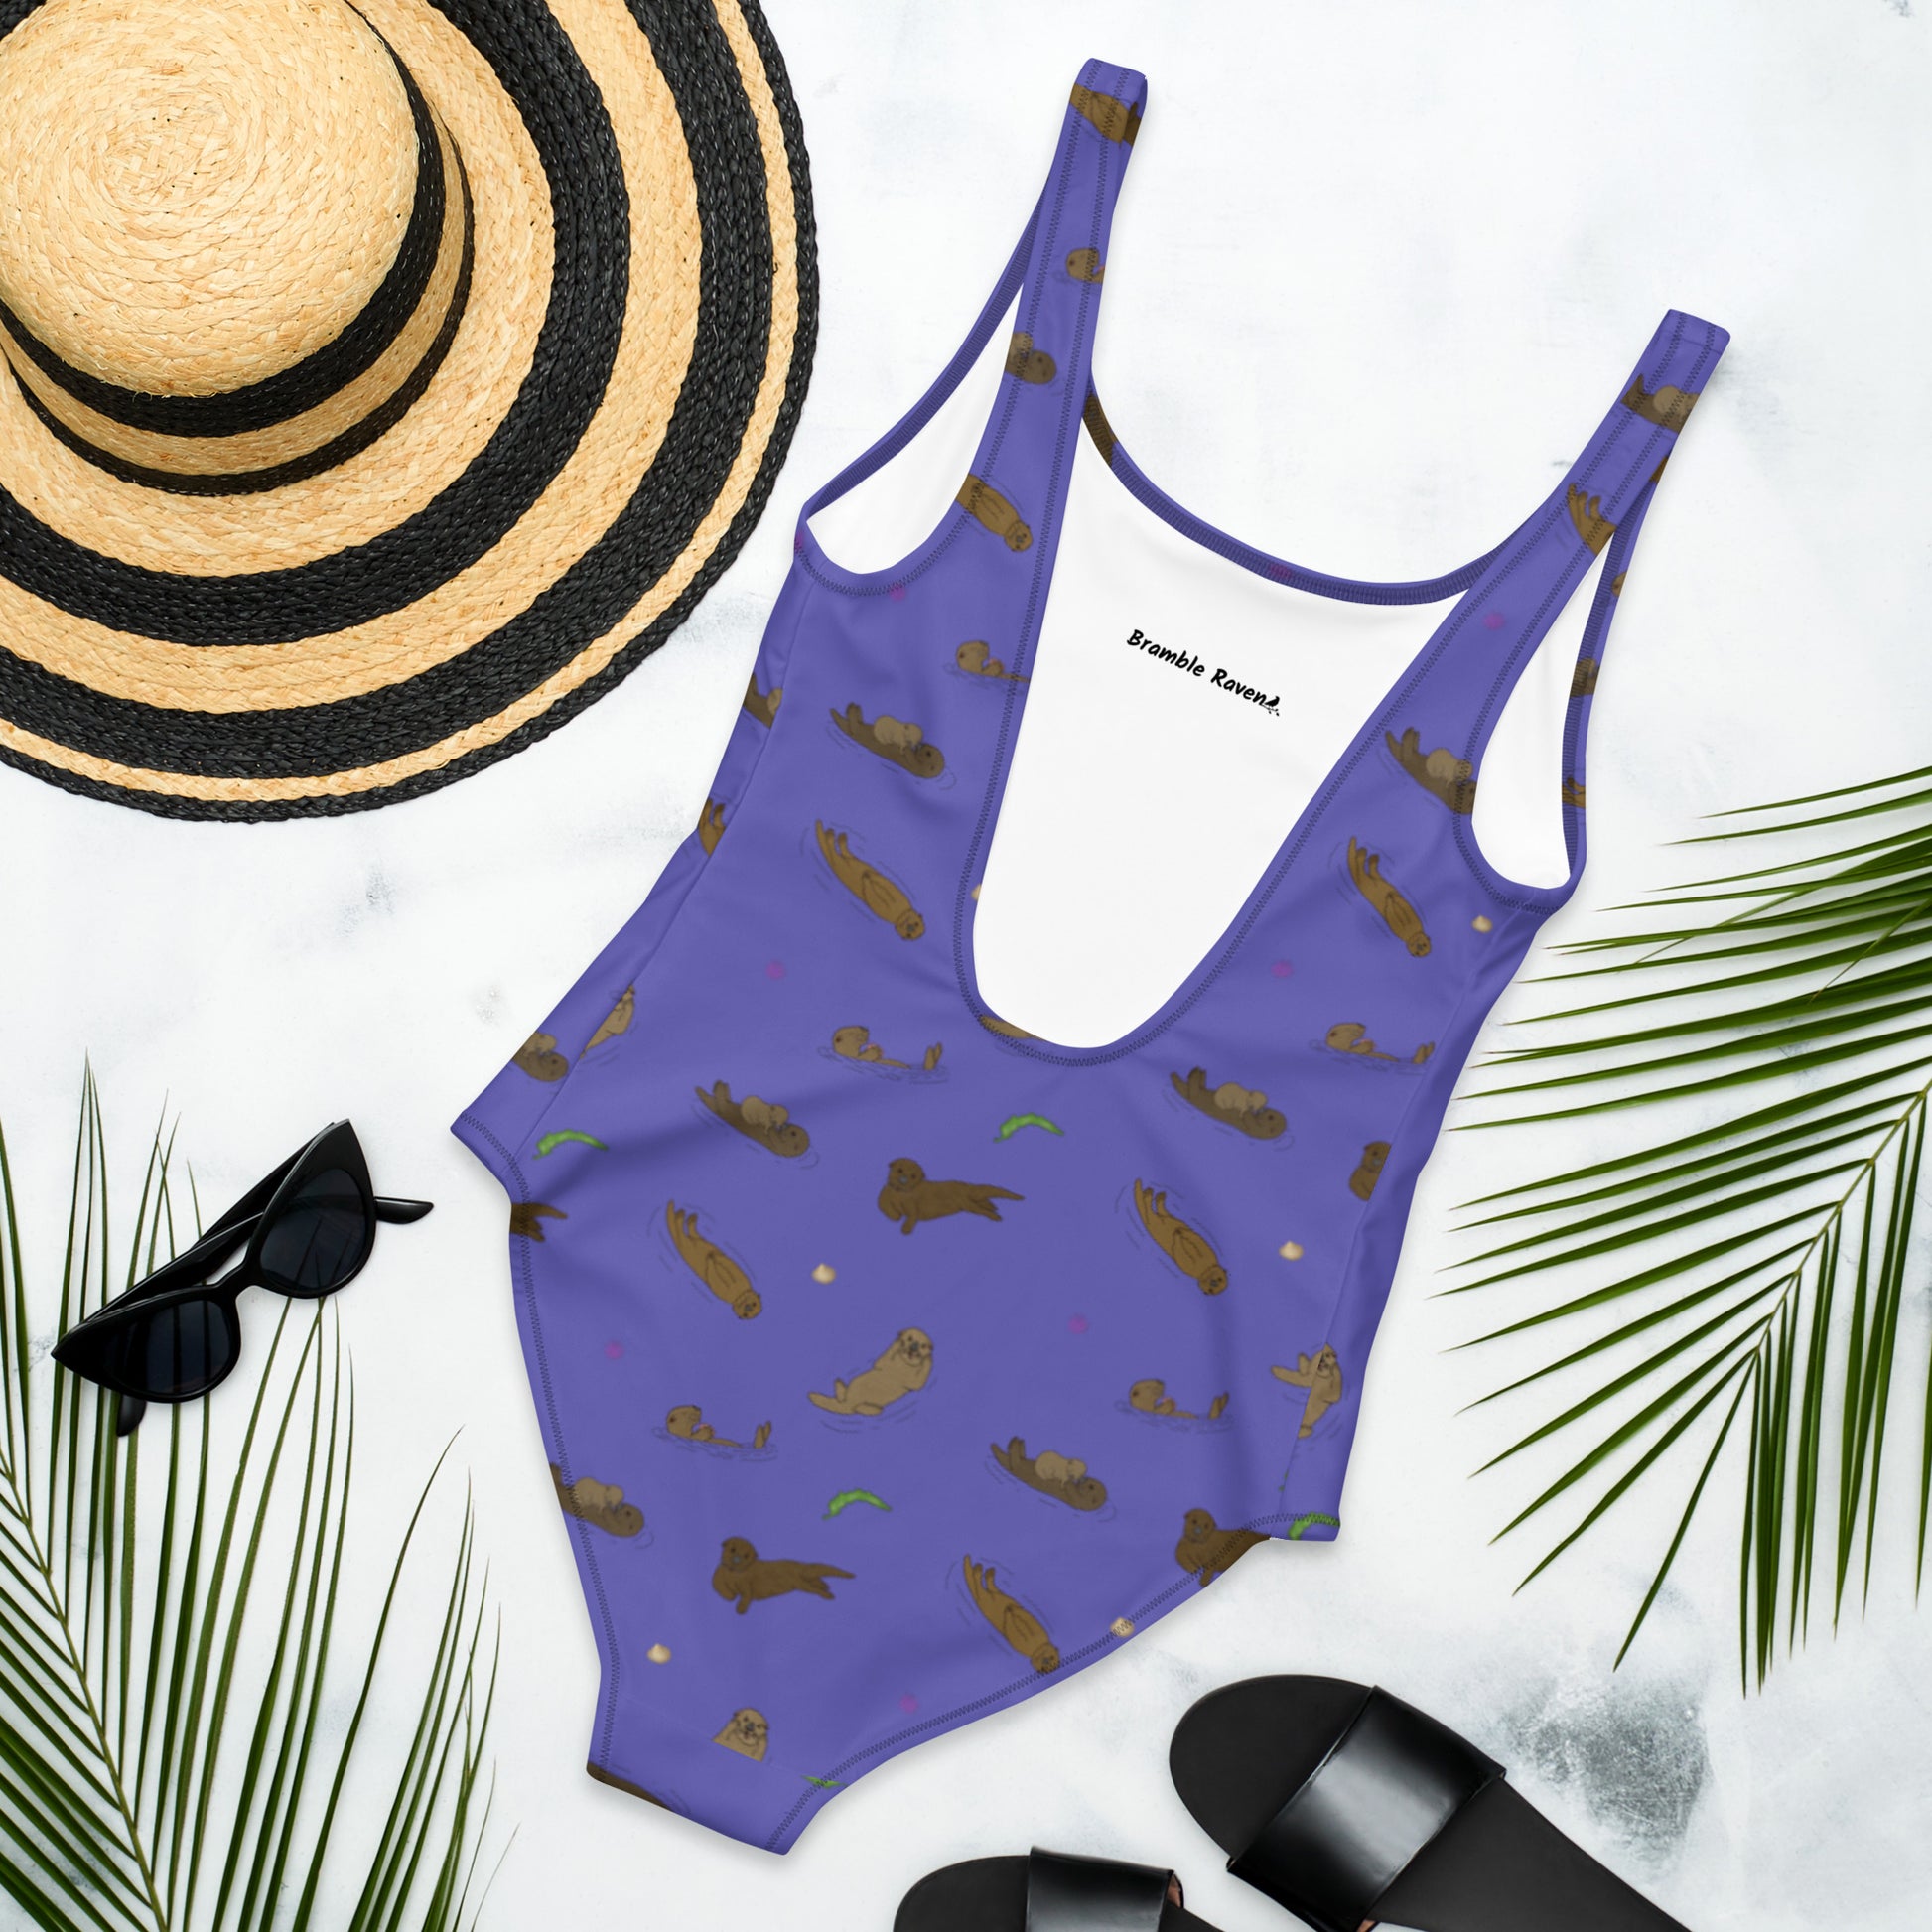 One piece swimsuit with a pattern of sea otters and ocean accents on a purple background. Image shows flat lay back view by a sunhat, sunglasses, sandals, and palm leaves.